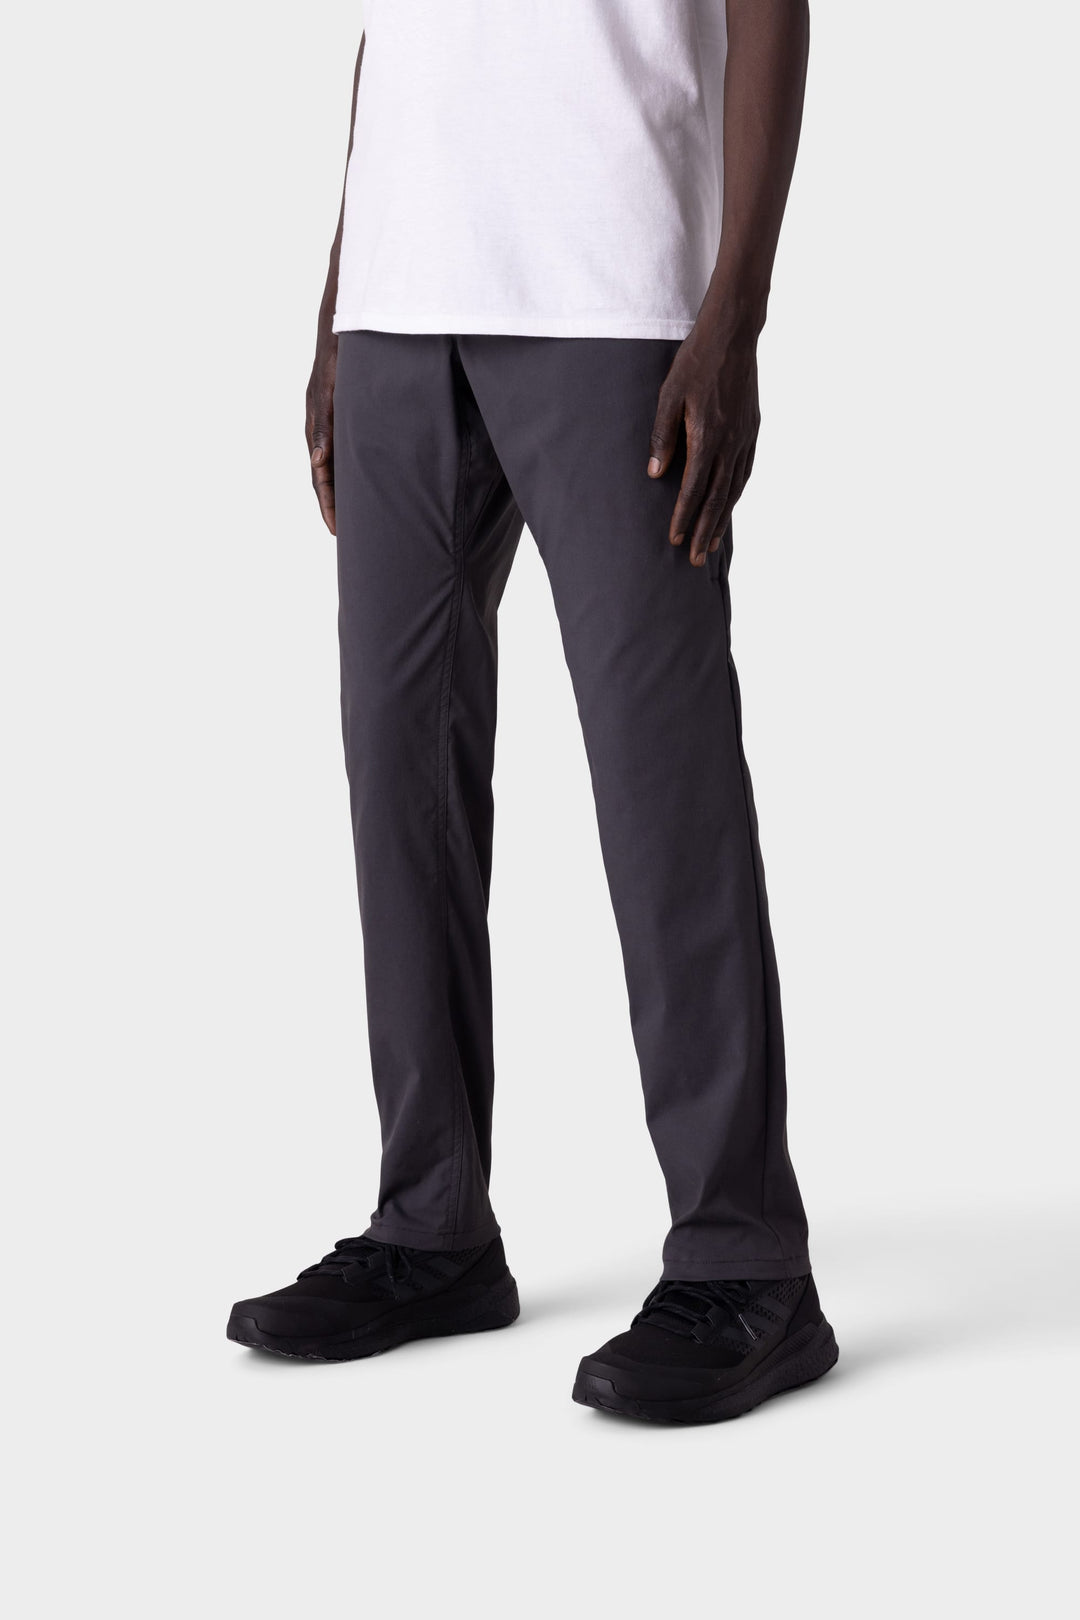 686 Everywhere Pant Slim Fit 34" - Charcoal - Front Close